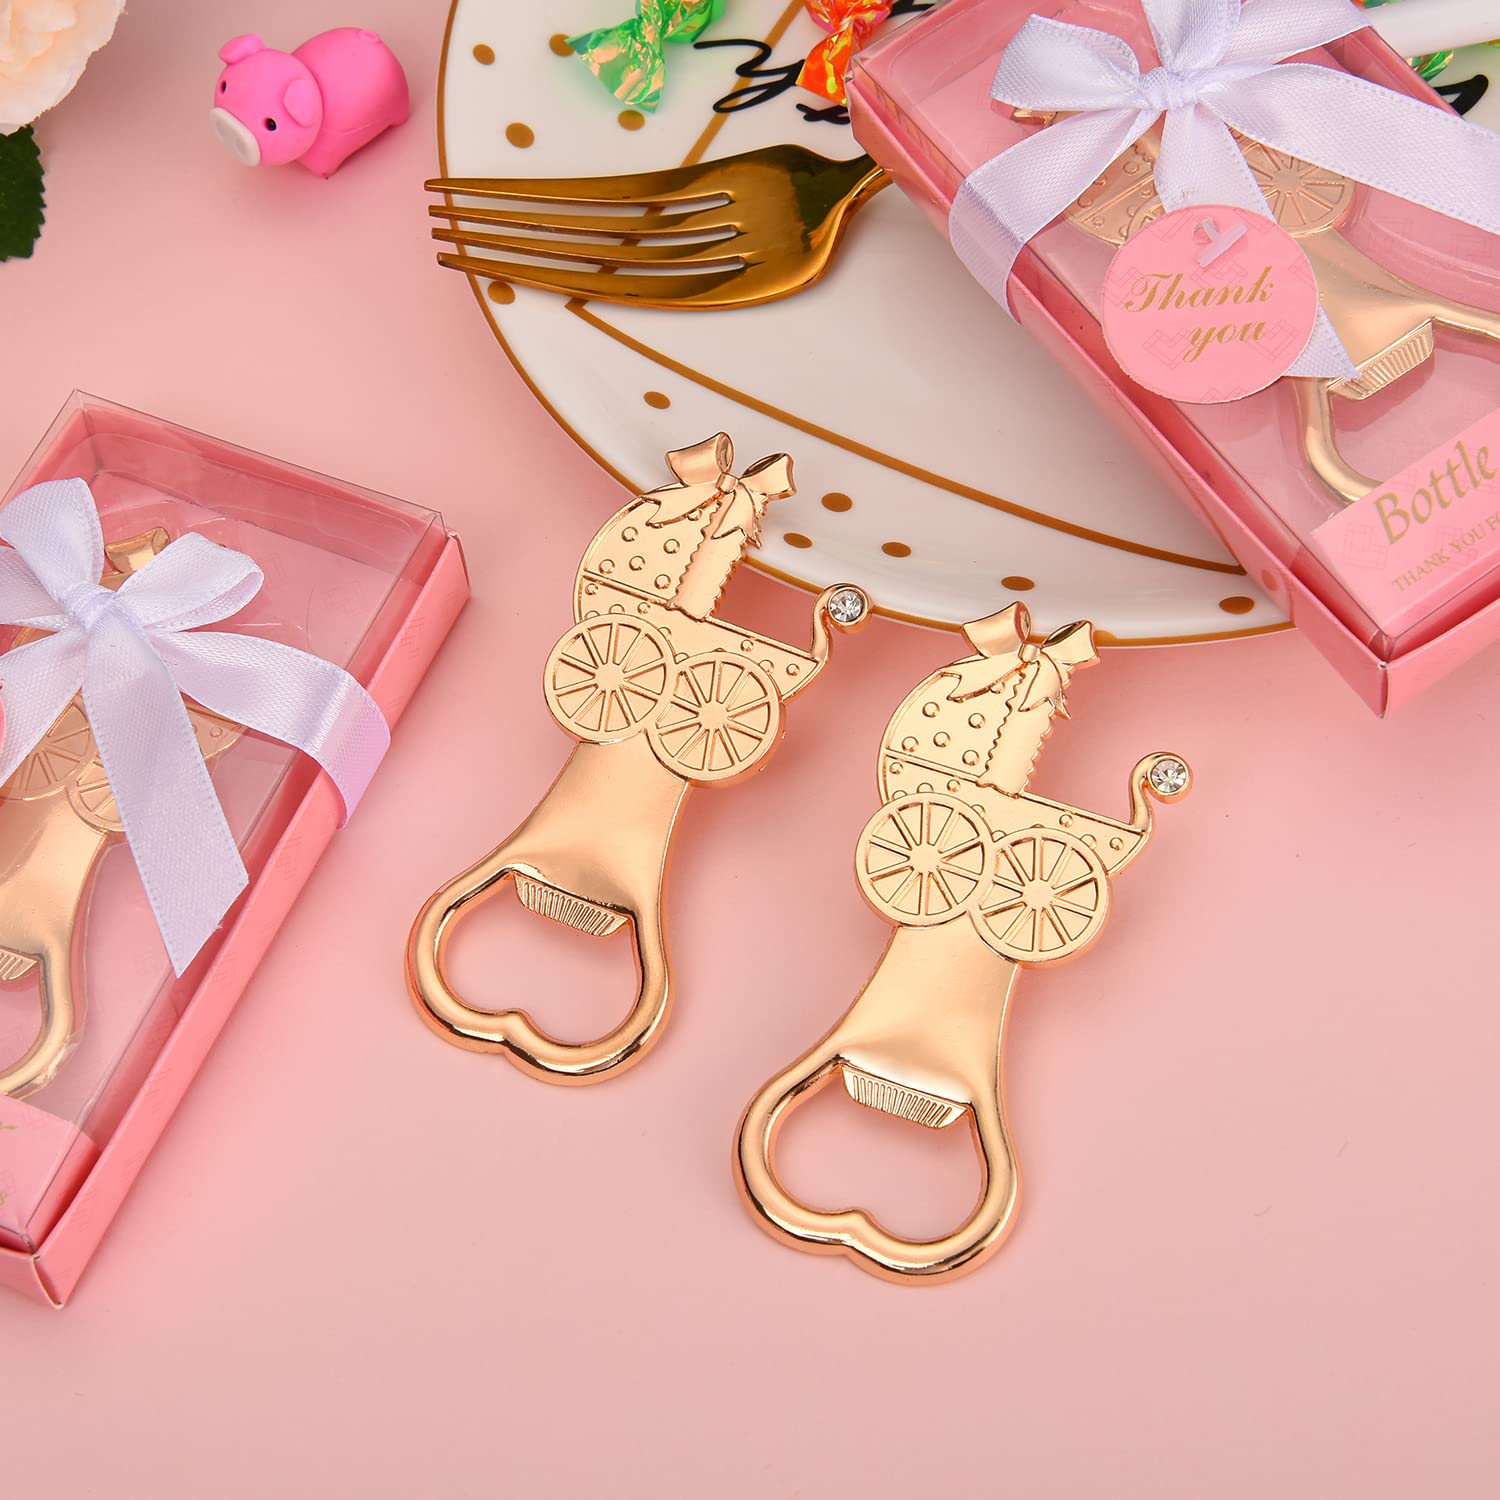 24 Pieces/packs Pink Baby Carriage Shaped Bottle Openers，Girl or Boy Baby Shower Favors, Gifts or Decorations for Guests with Gift Boxes Party Return Souvenirs Giveaways Bulk